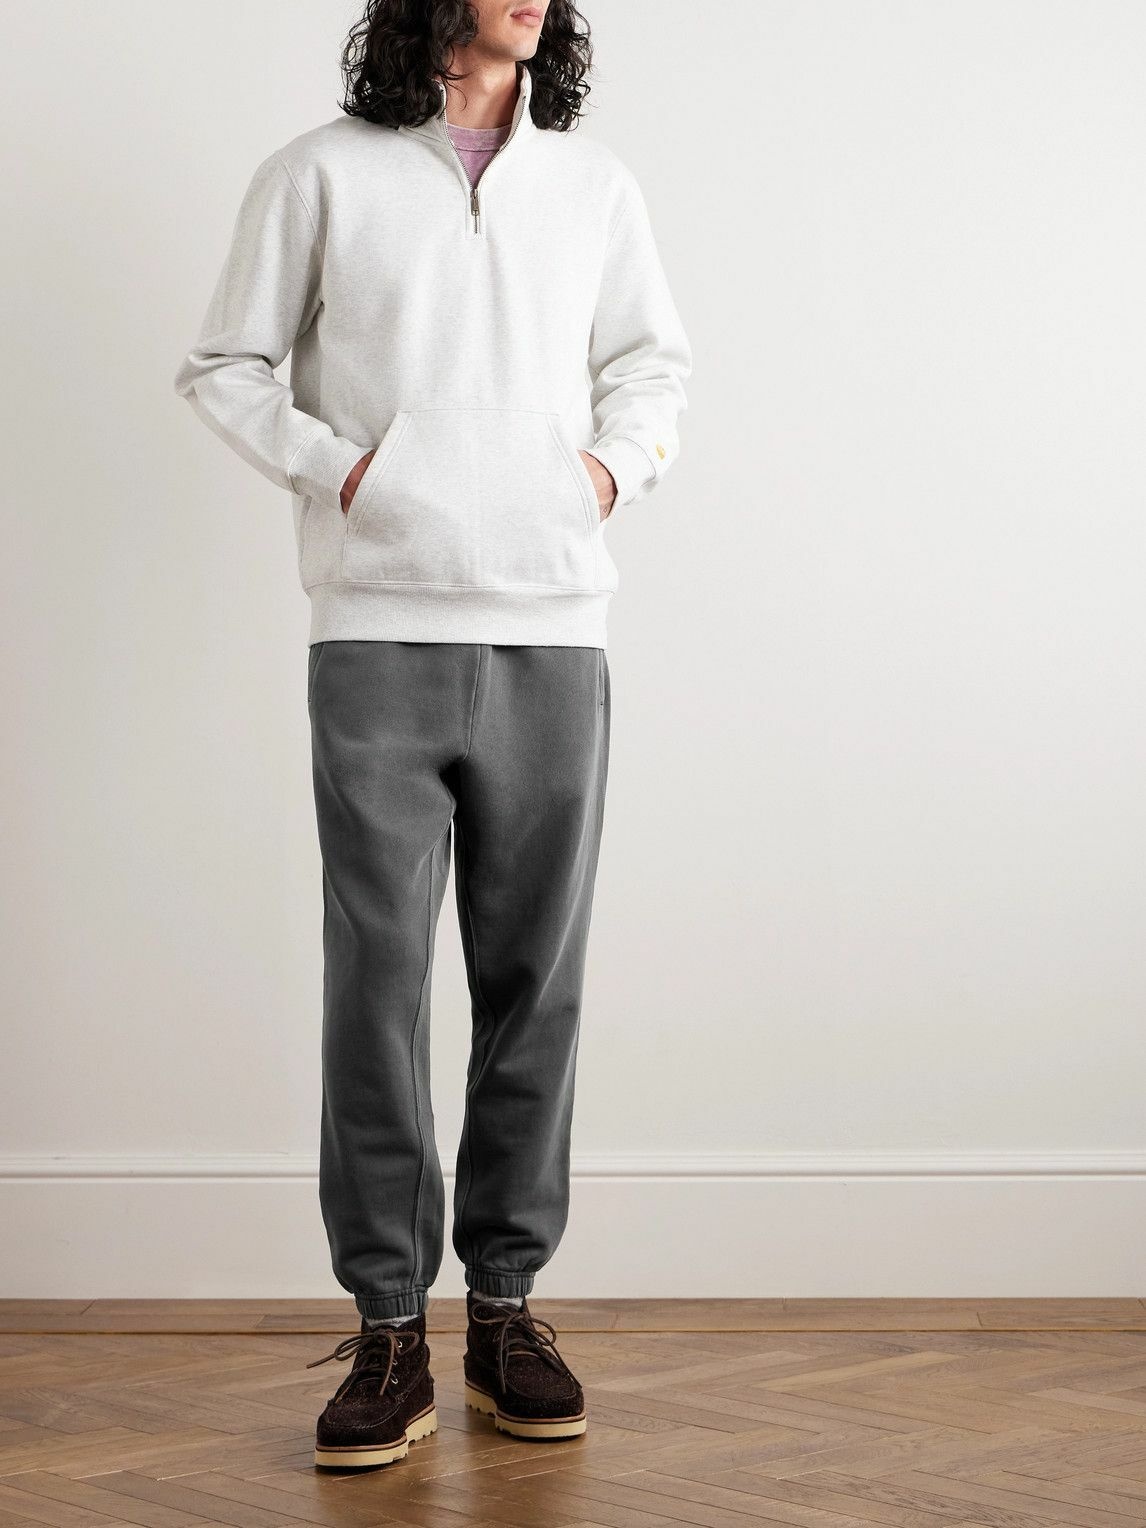 Carhartt WIP - Nelson Tapered Garment-Dyed Cotton-Jersey Sweatpants - Gray